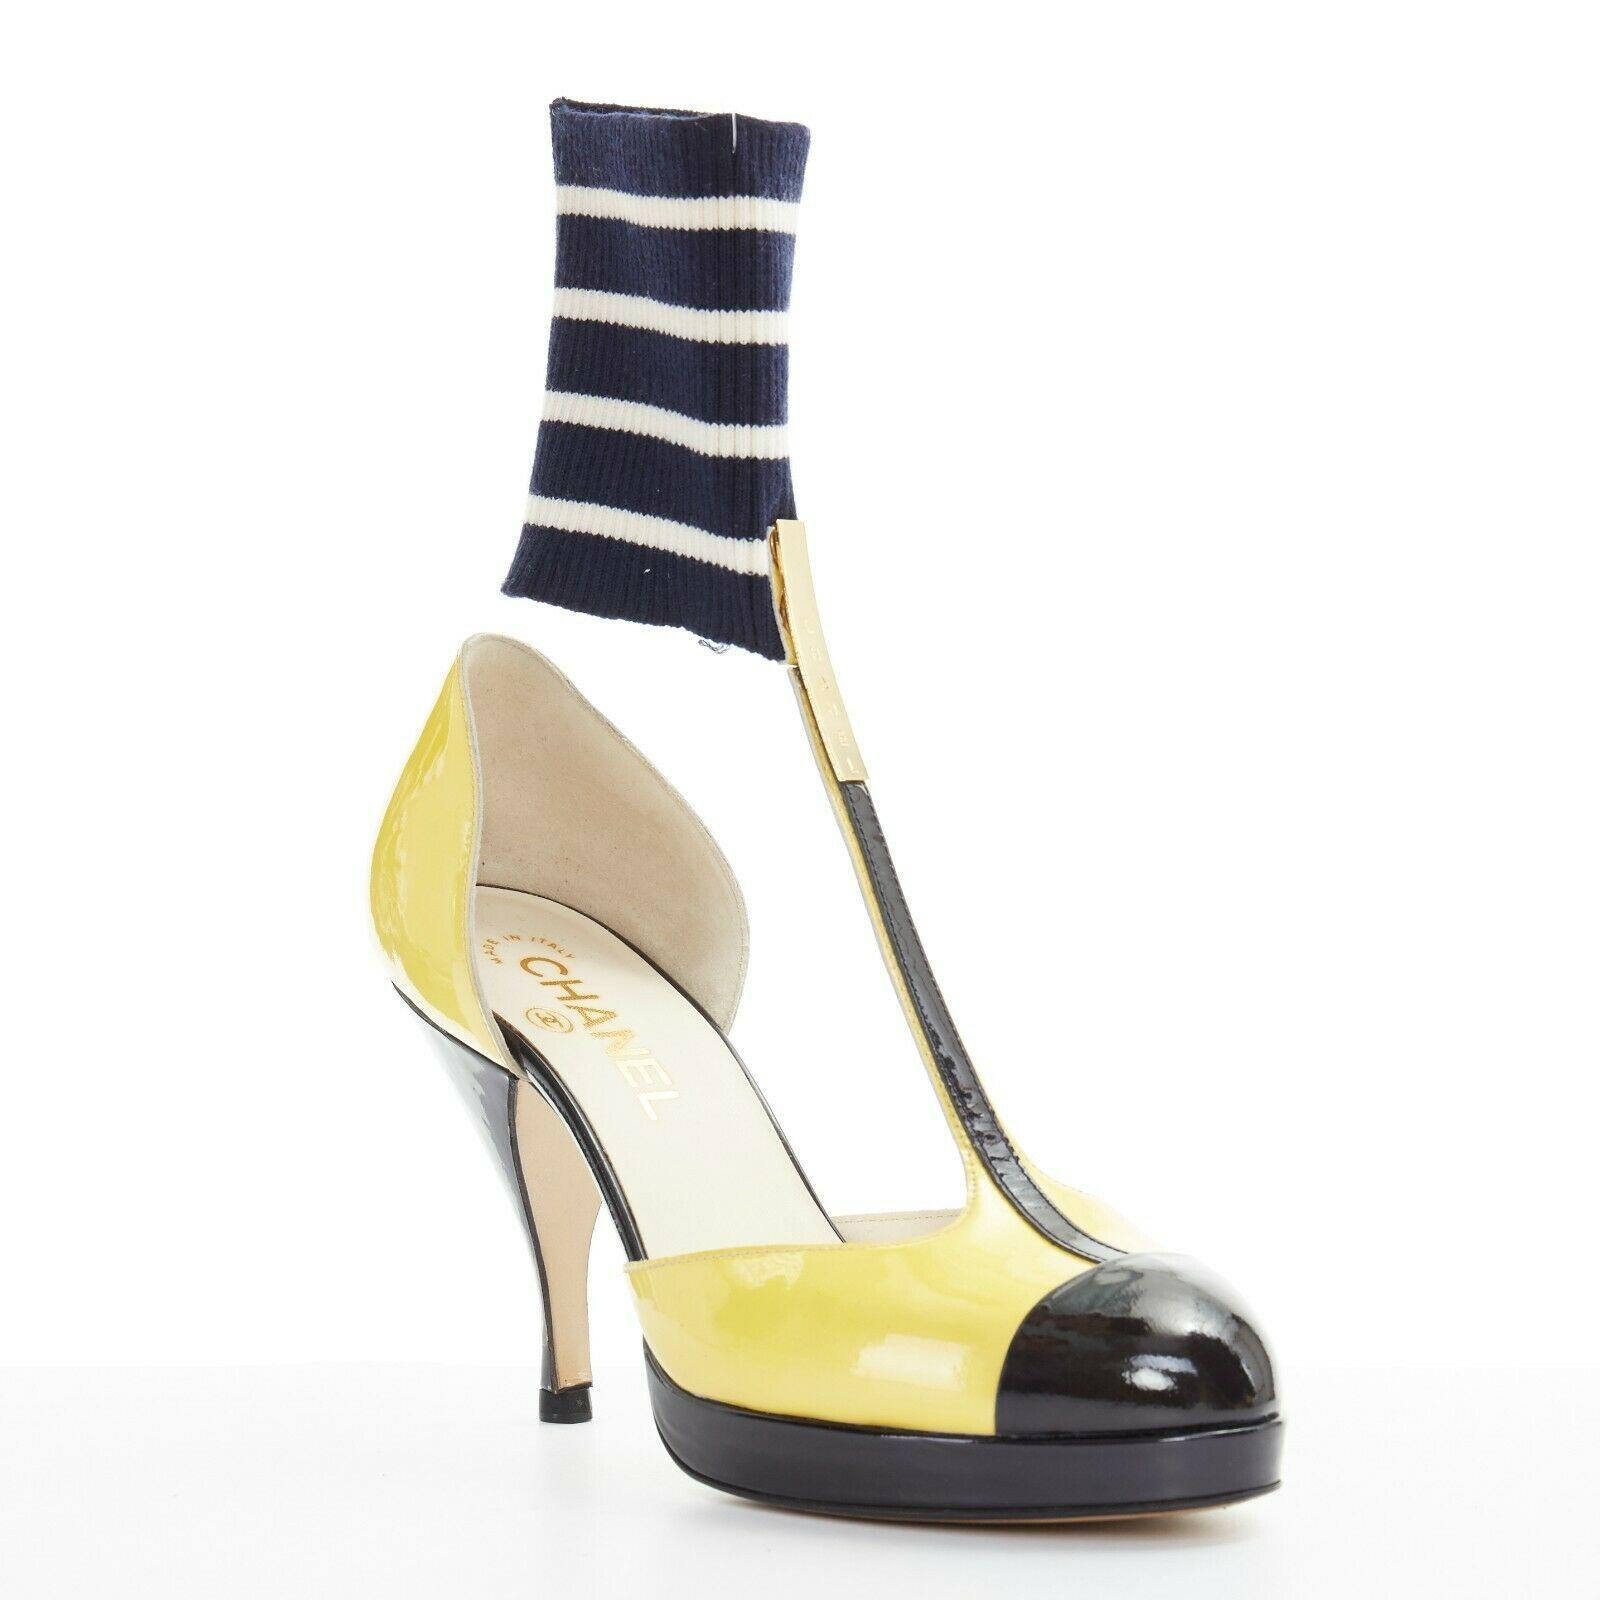 CHANEL 08C yellow black patent T-strap changeable ribbed ankle spck pump EU37

CHANEL
FROM THE 08C COLLECTION
Yellow and black patent leather upper. Black toe cap. Rounded toe. Platform sole. T-strap. Gold-tone hardware signed CHANEL at front.